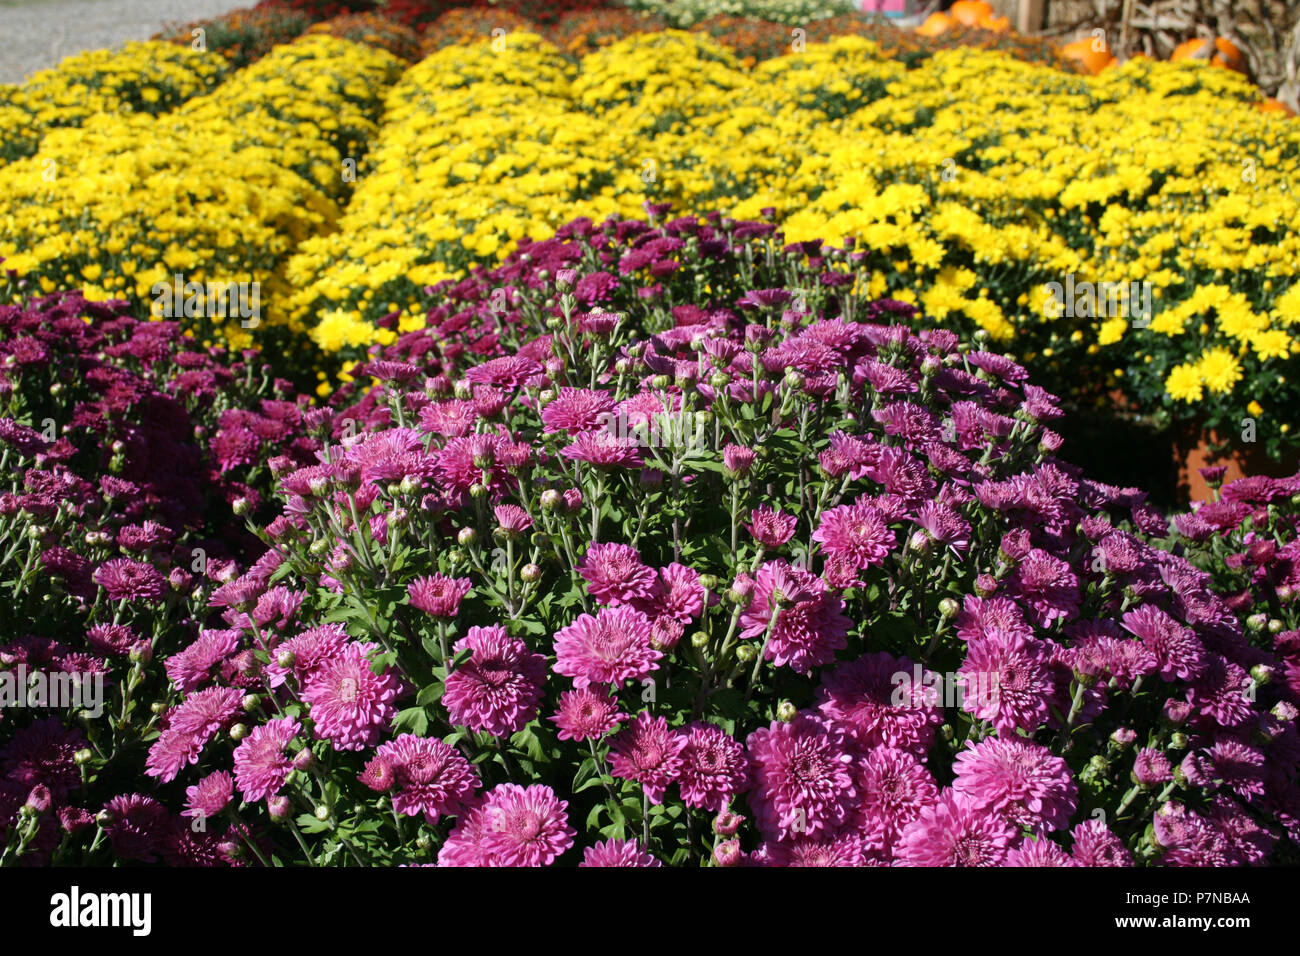 Chrysanthemums are divided into two basic groups, garden hardy and exhibition Stock Photo